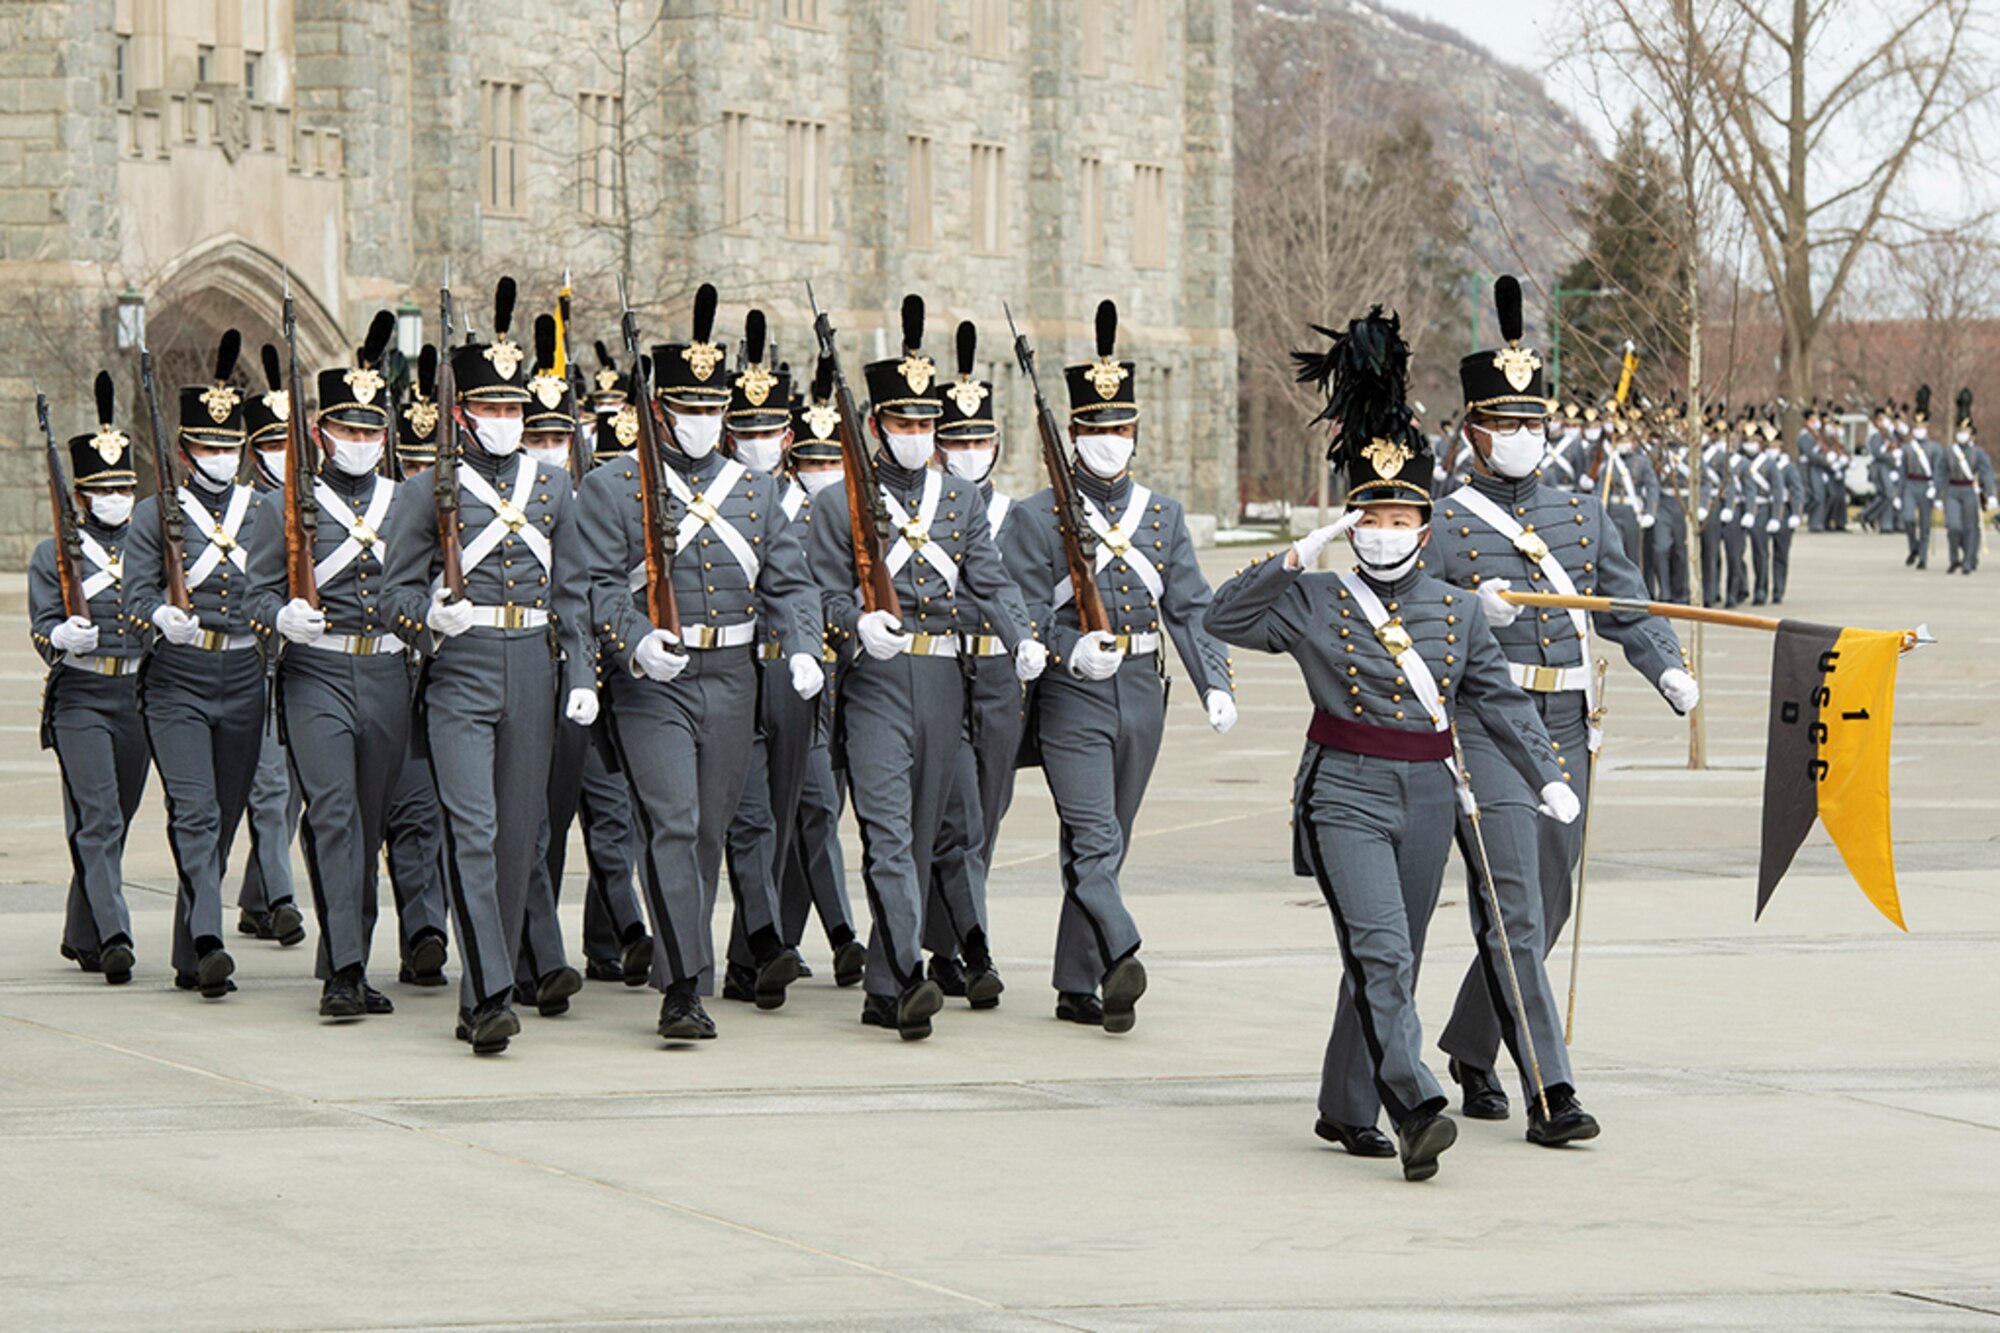 U.S. Military Academy cadets march in formation in front of a building.